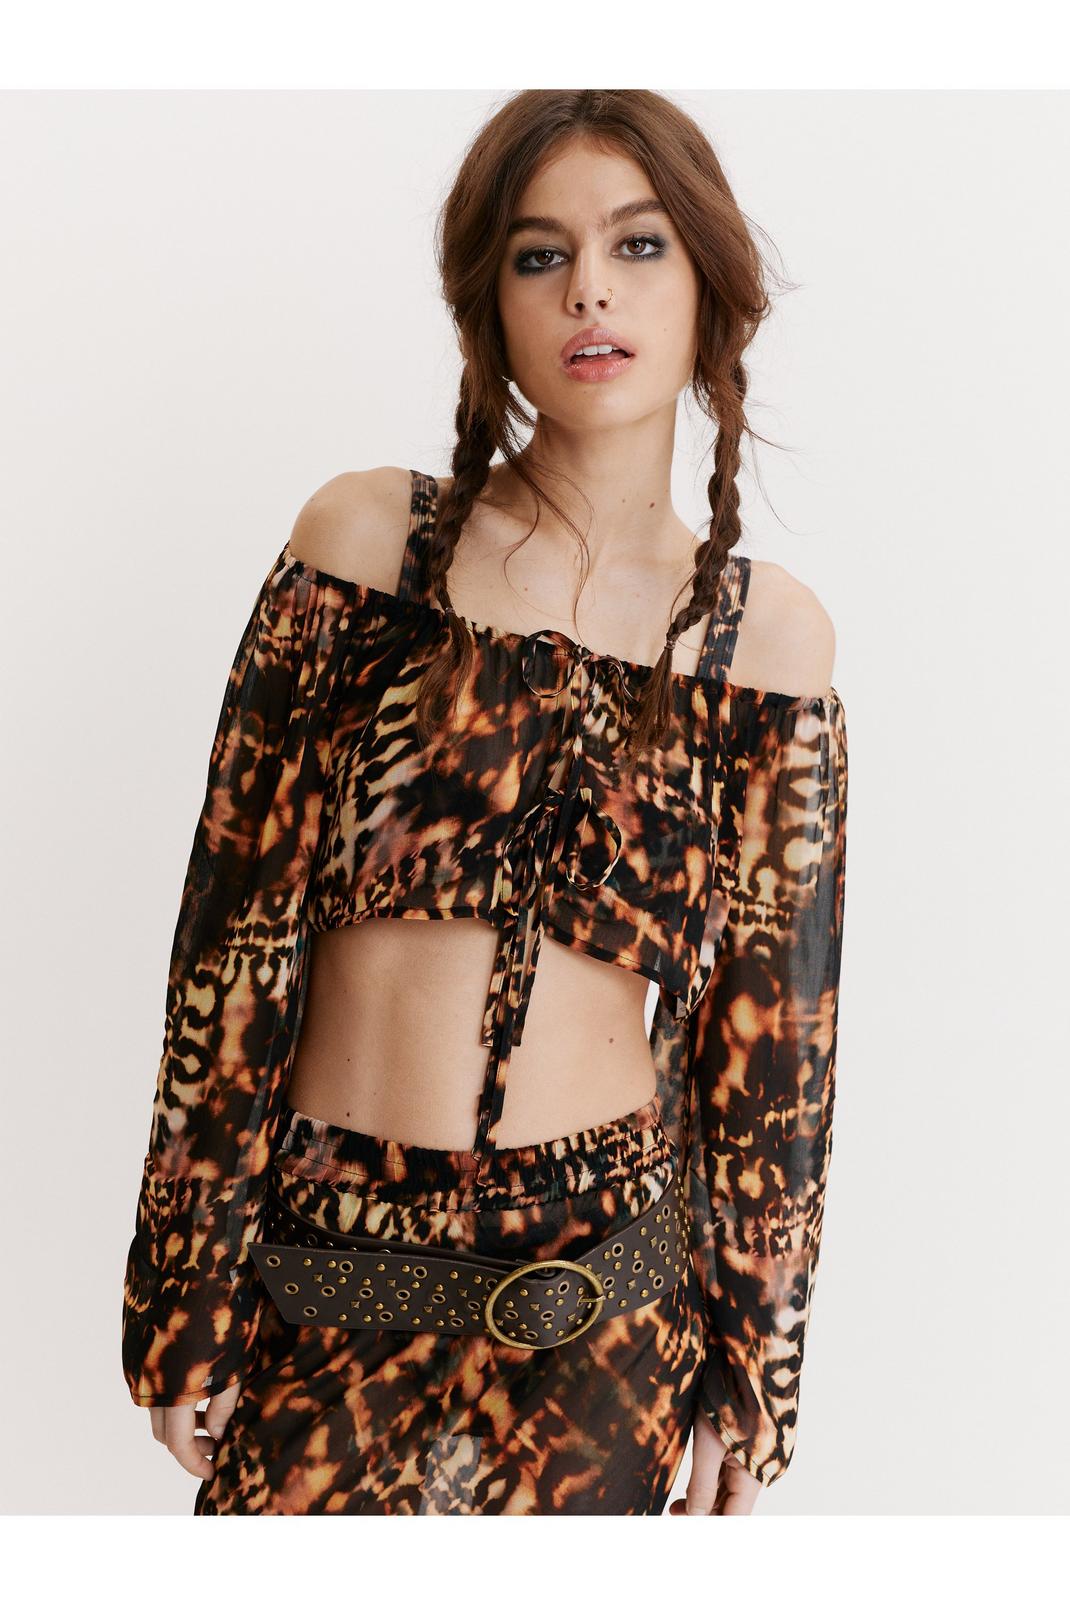 Brown Sheer Animal Print Tie Front Beach Cover Up Top image number 1